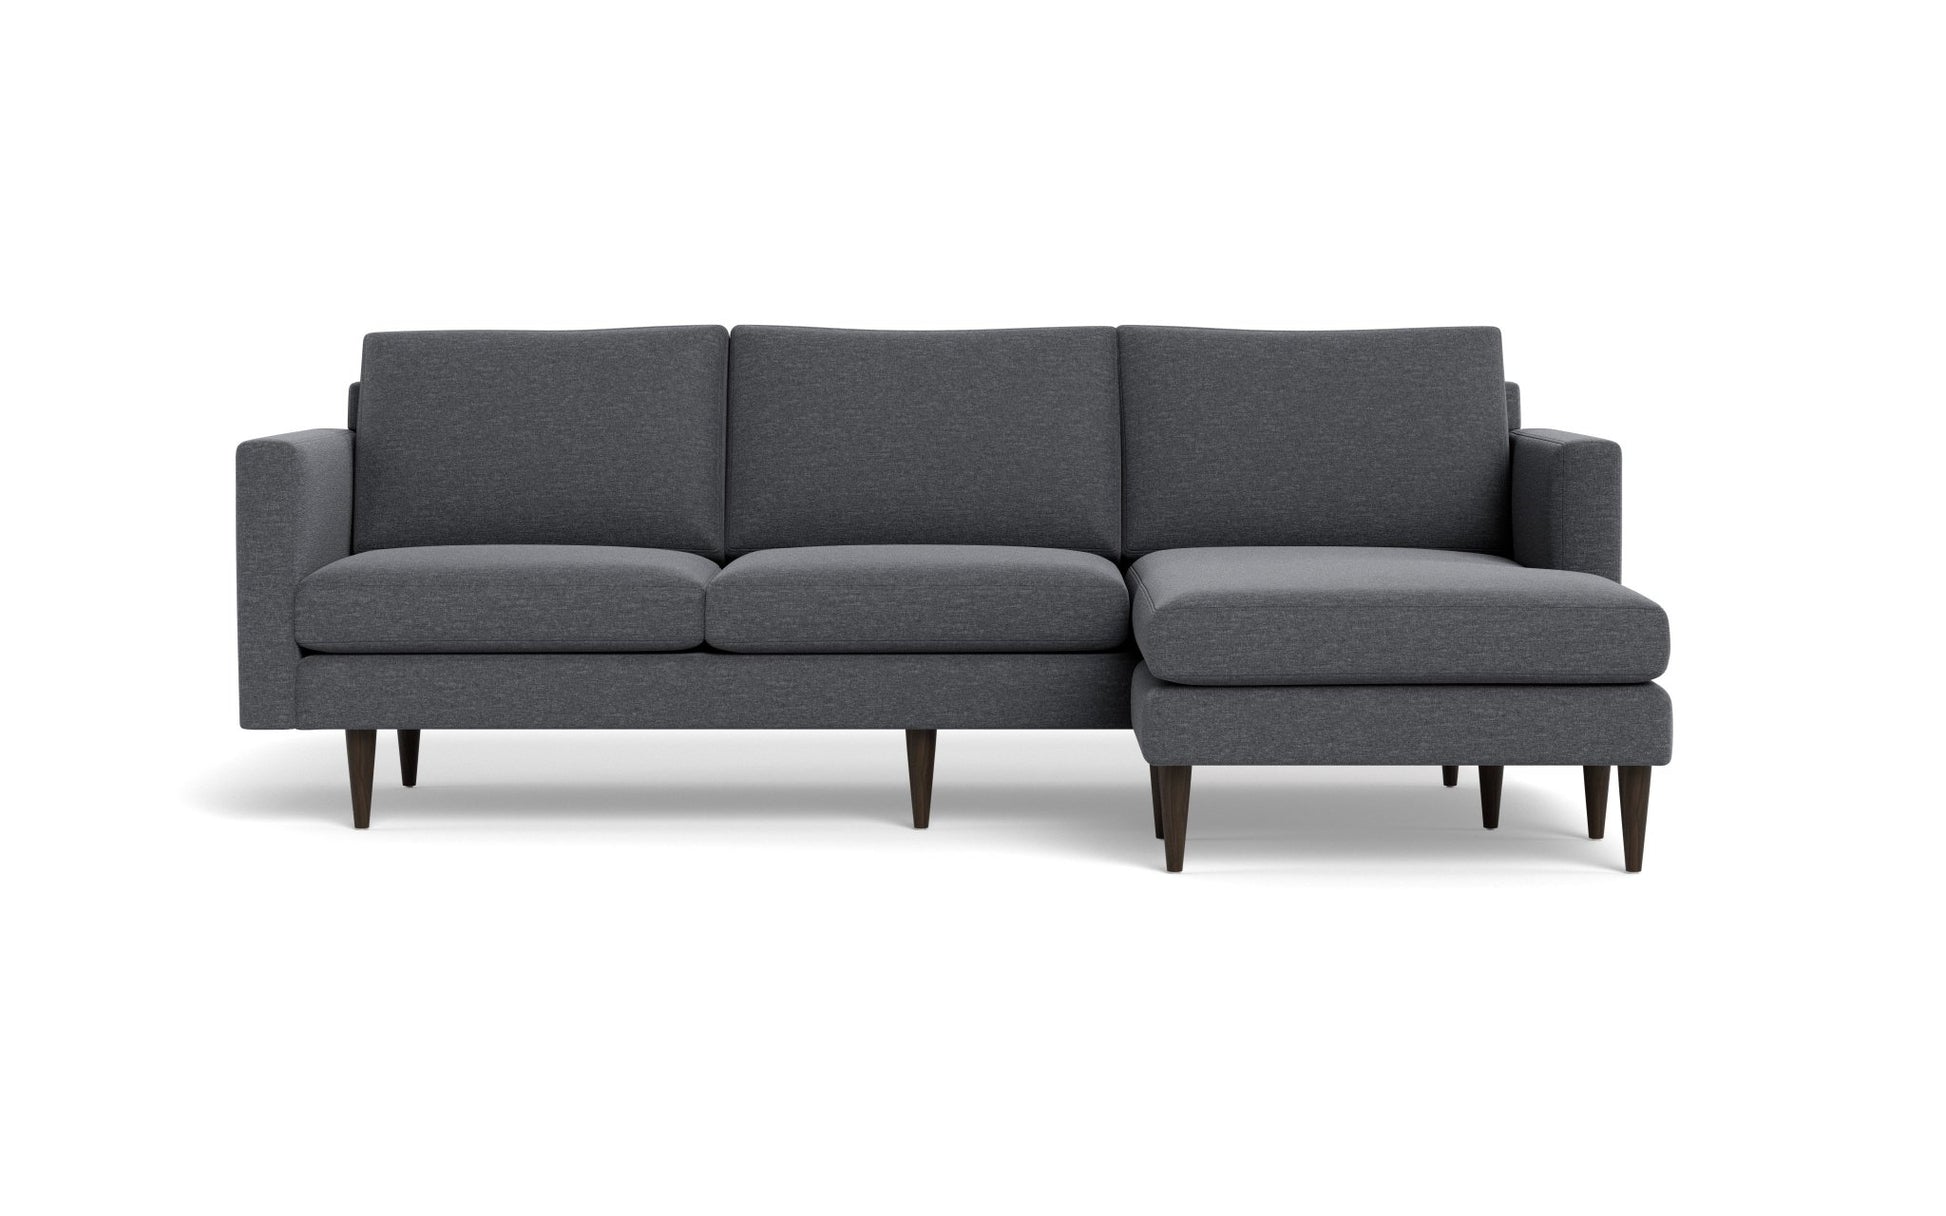 Wallace Untufted Reversible Chaise Sofa - Bennett Charcoal